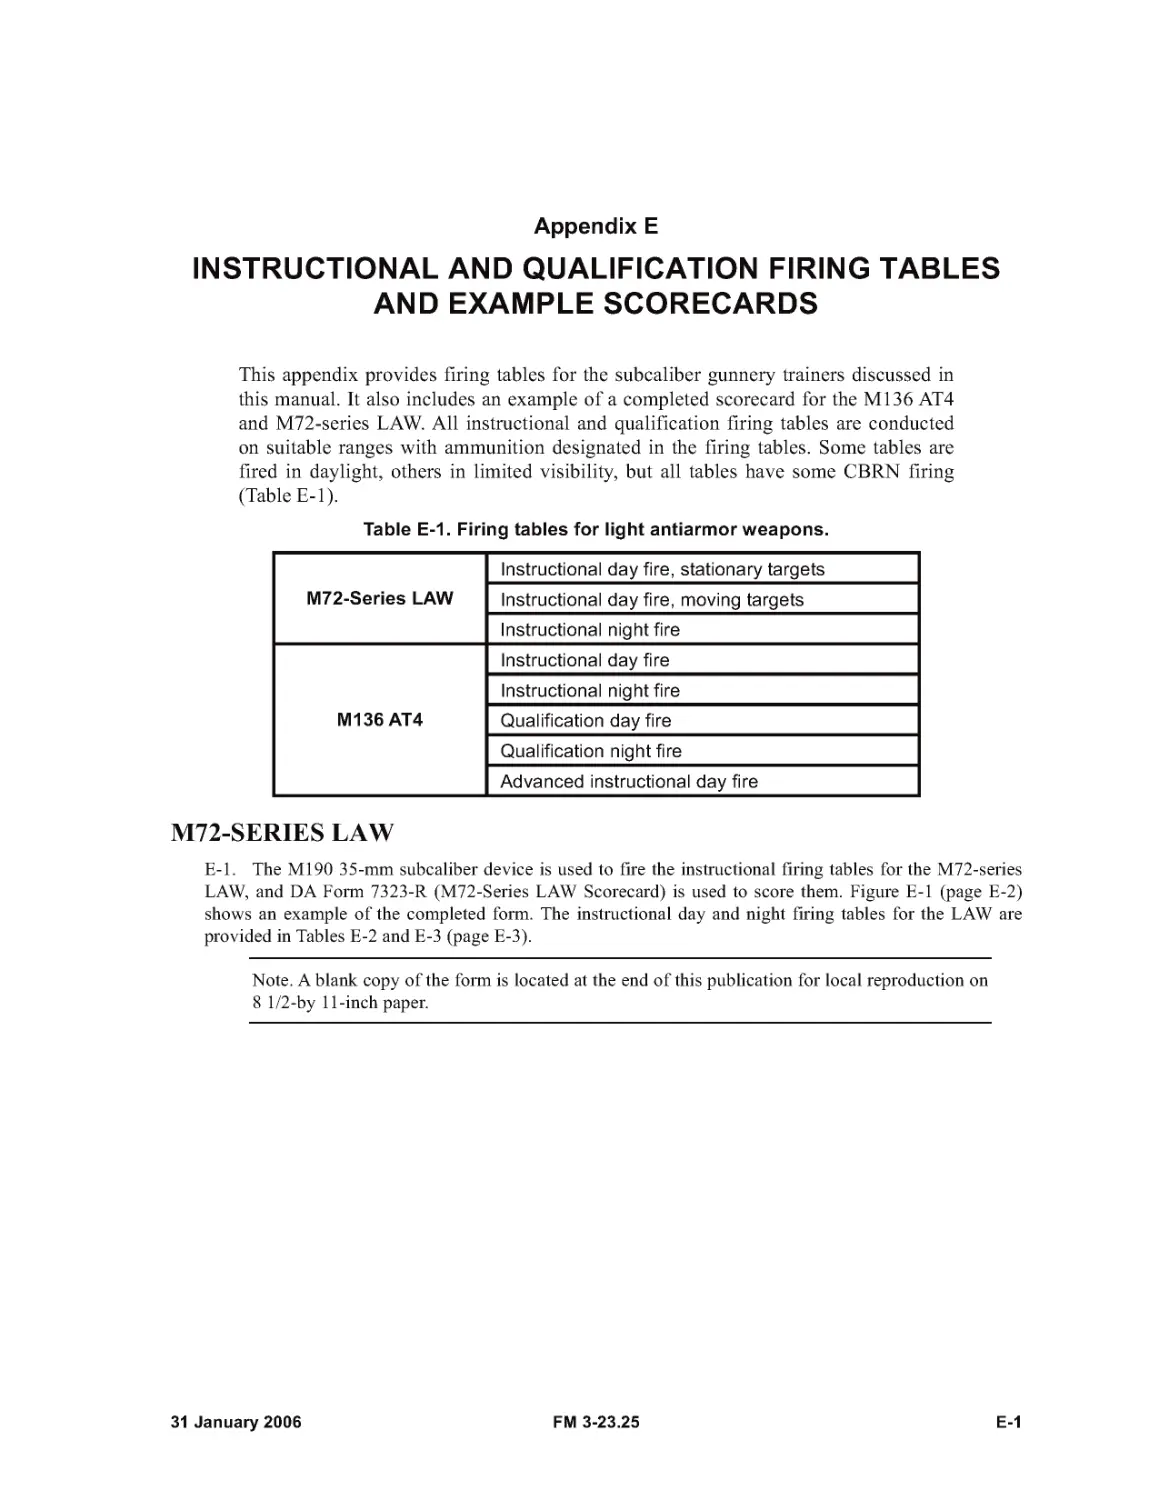 Table E-1. Firing tables for light antiarmor weapons.
Appendix E - INSTRUCTIONAL AND QUALIFICATION FIRING TABLESAND EXAMPLE SCORECARDS